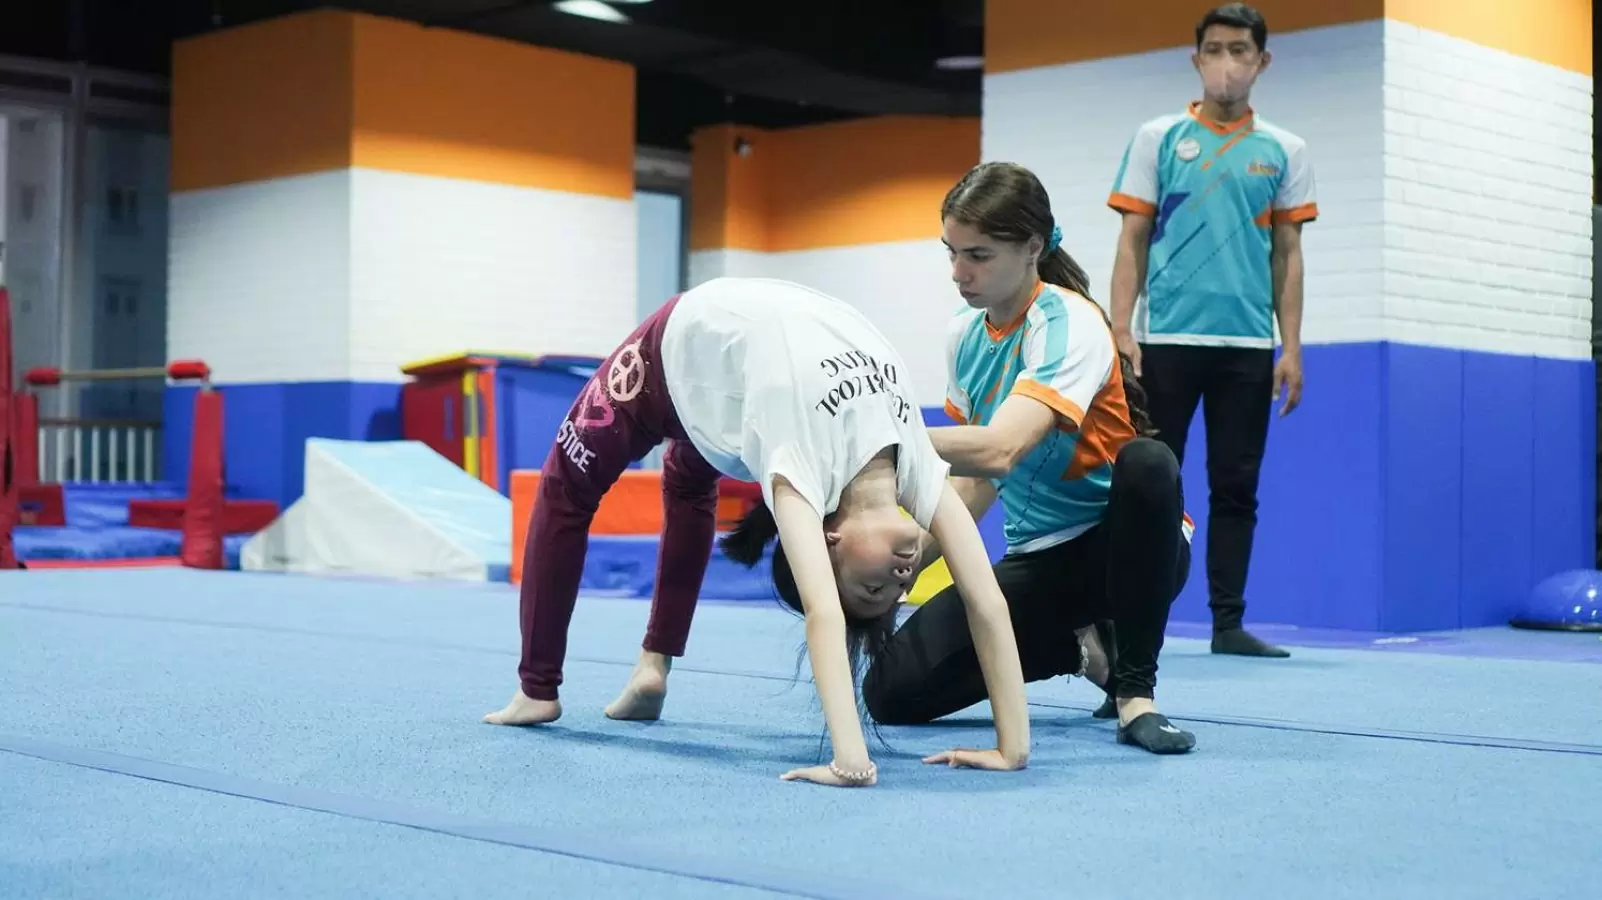 The Best Gymnastics Stretching to Improve Your Strength and Flexibility